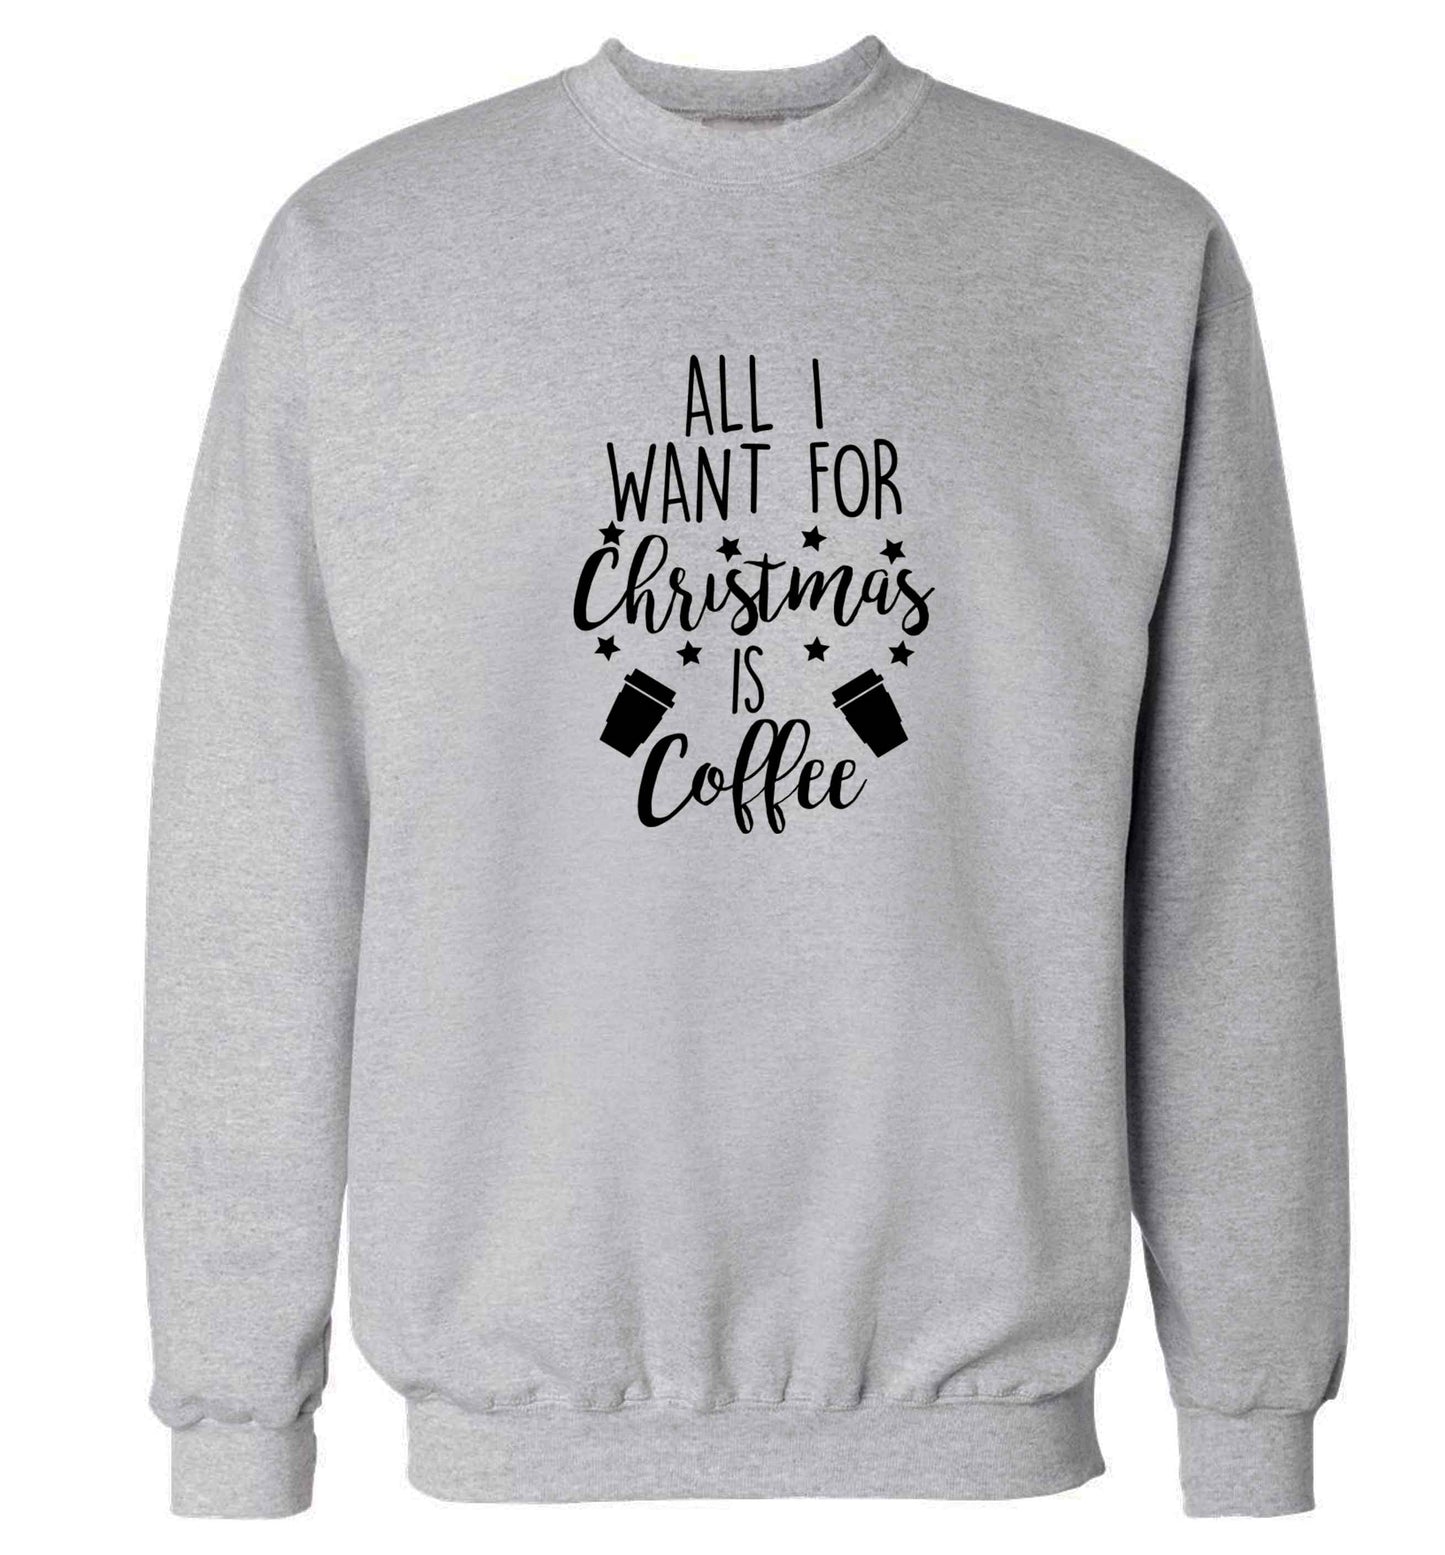 All I want for Christmas is coffee Adult's unisex grey Sweater 2XL